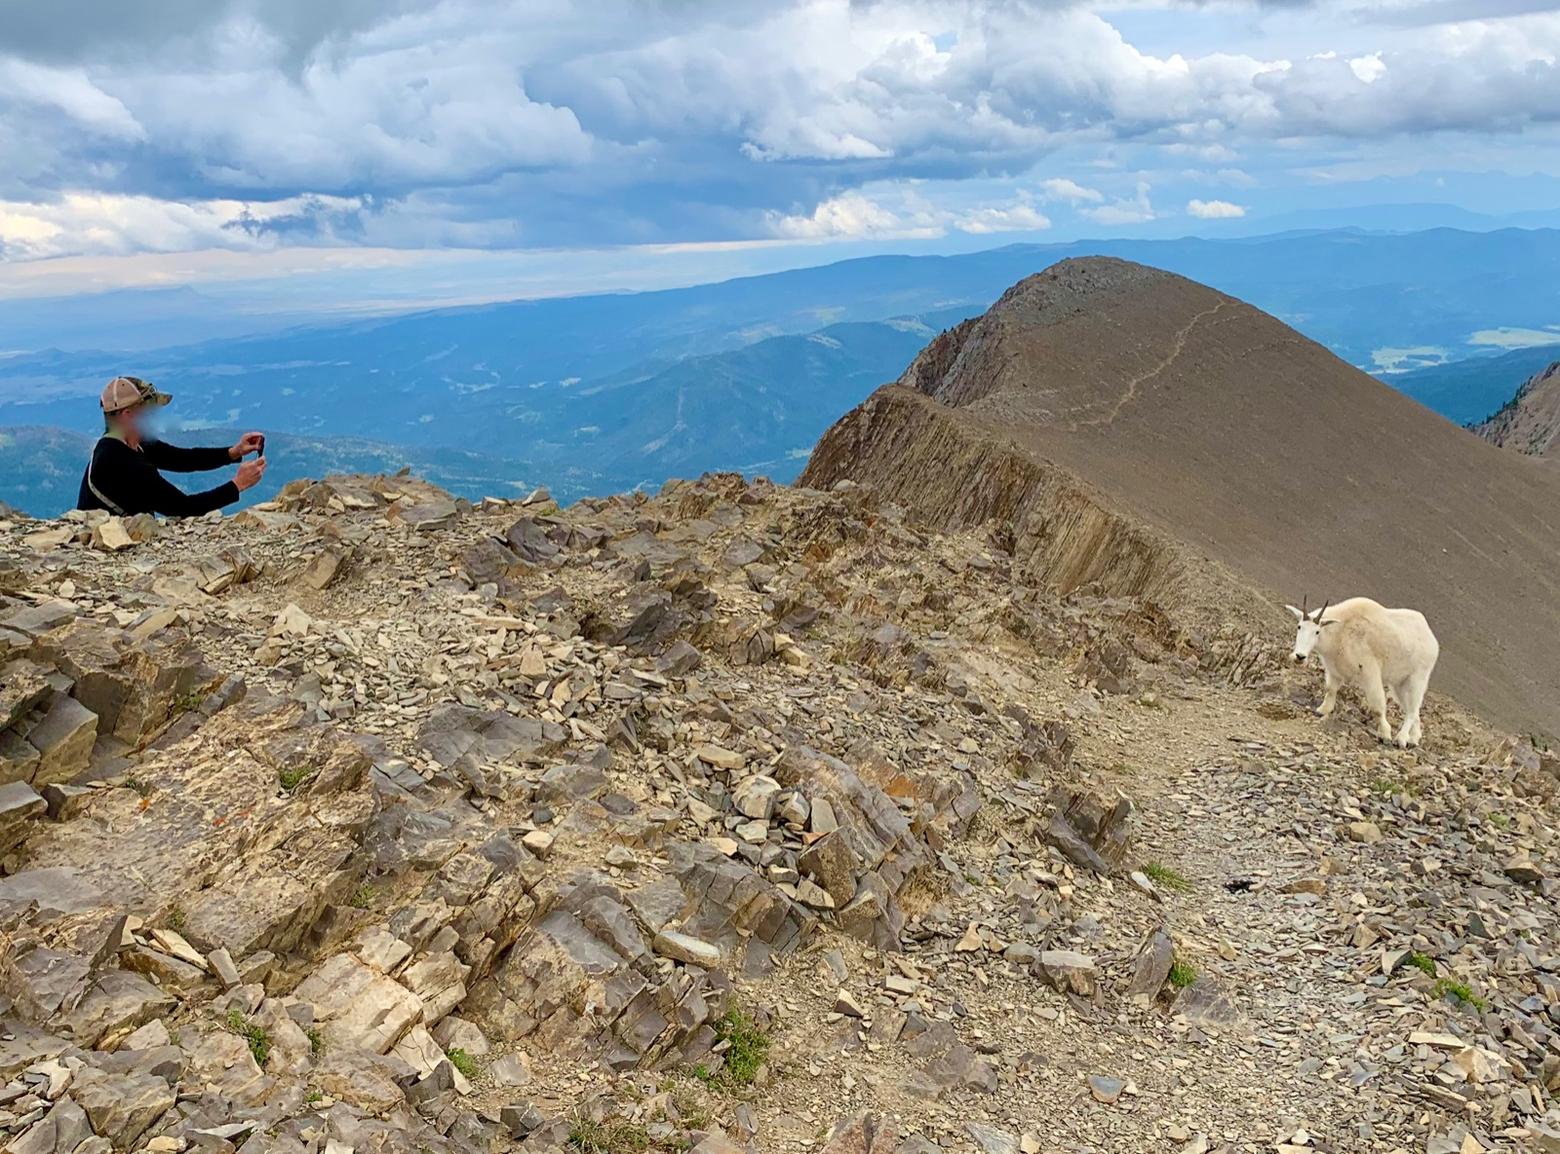 A peak encounter between visitor and local resident on Sacagawea Peak in the Bridger Mountains outside Bozeman.